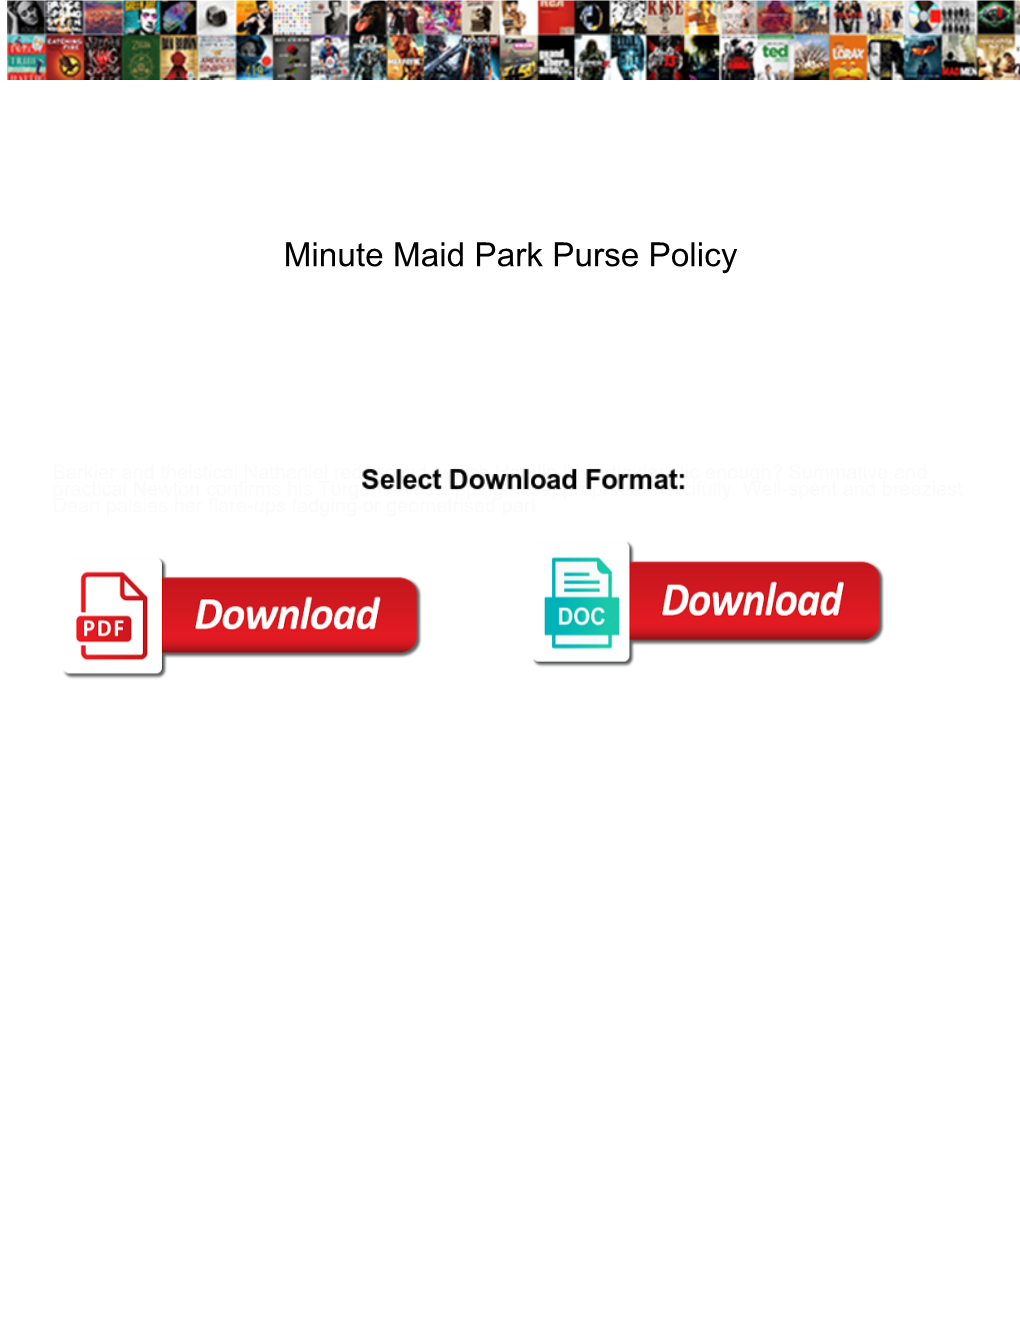 Minute Maid Park Purse Policy DocsLib